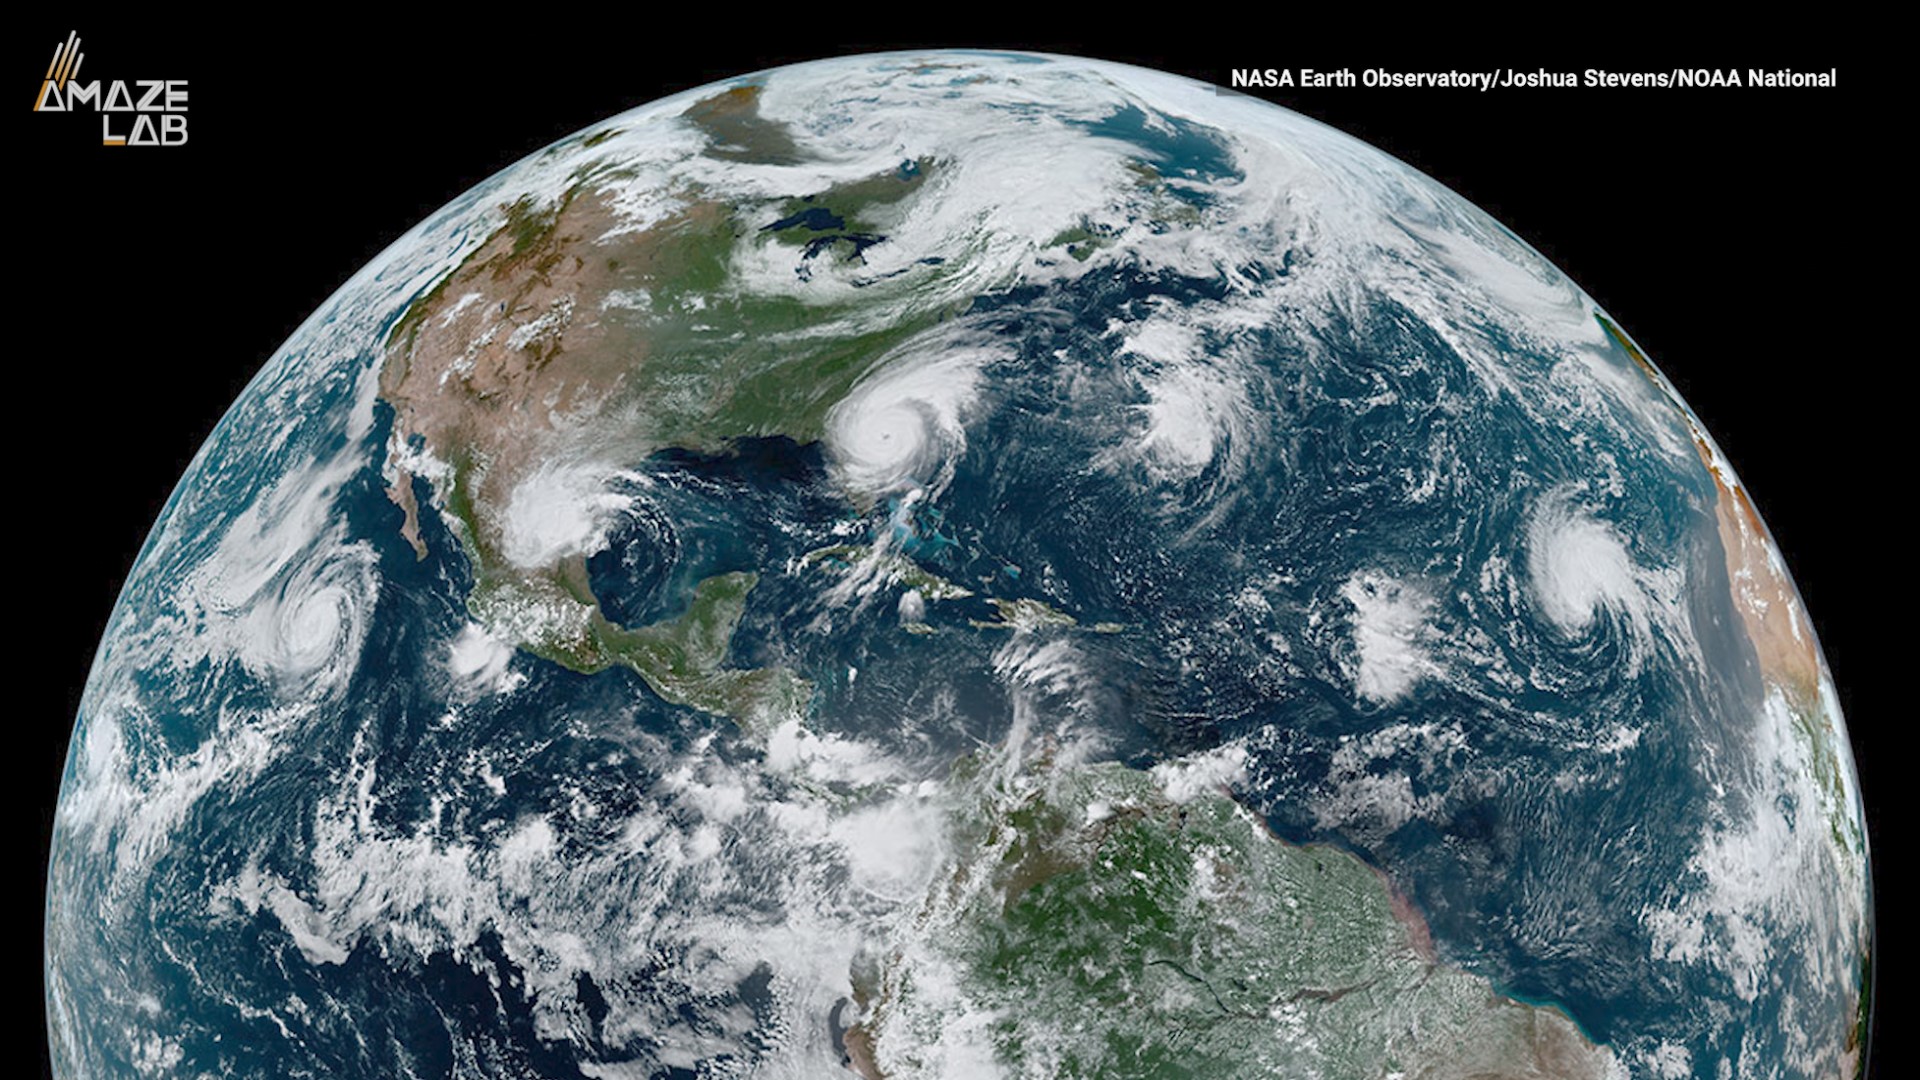 Hurricane Dorian has done some major damage, but it's not the only storm that's been swirling. NASA shared a NOAA satellite image of four tropical cyclones across the Western Hemisphere.